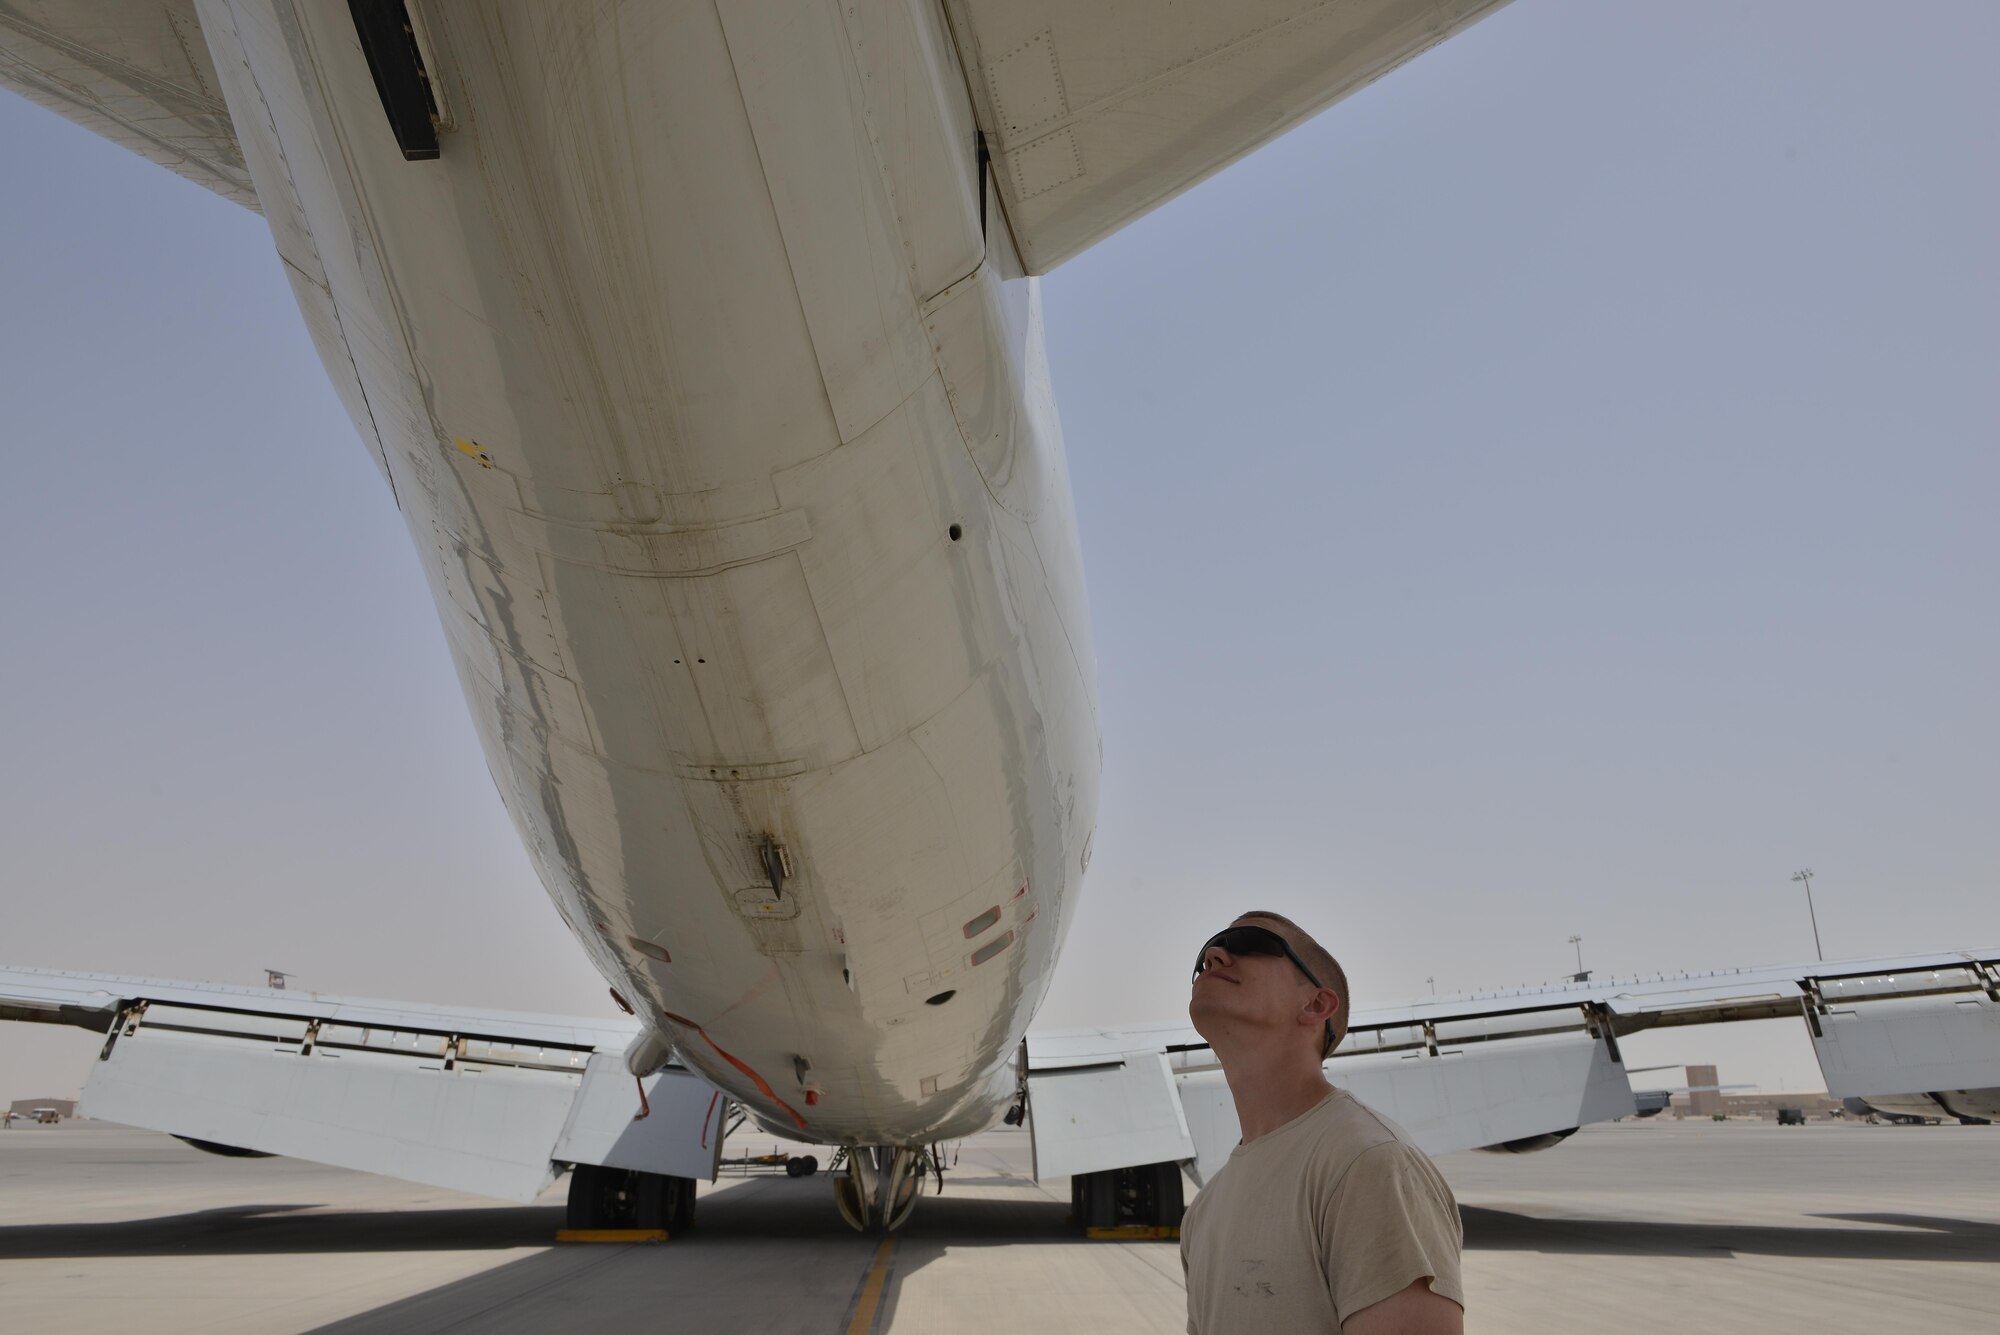 A 7th Expeditionary Air Mobility Unit maintenance airmen checks for damages and minor repairs on a Boeing E-8C Joint Surveillance Target Attack Radar Systems June 2, 2015 Al Udeid Air Base, Qatar. The E-8C JSTARS and its active duty, guard and reserve service members conduct missions overseas to support operations on the war on terror. During this time JSTARS completed 100K combat hours by continually flying 24/7 for 11.4 years. (U.S. Air Force photo/Staff Sgt. Alexandre Montes)